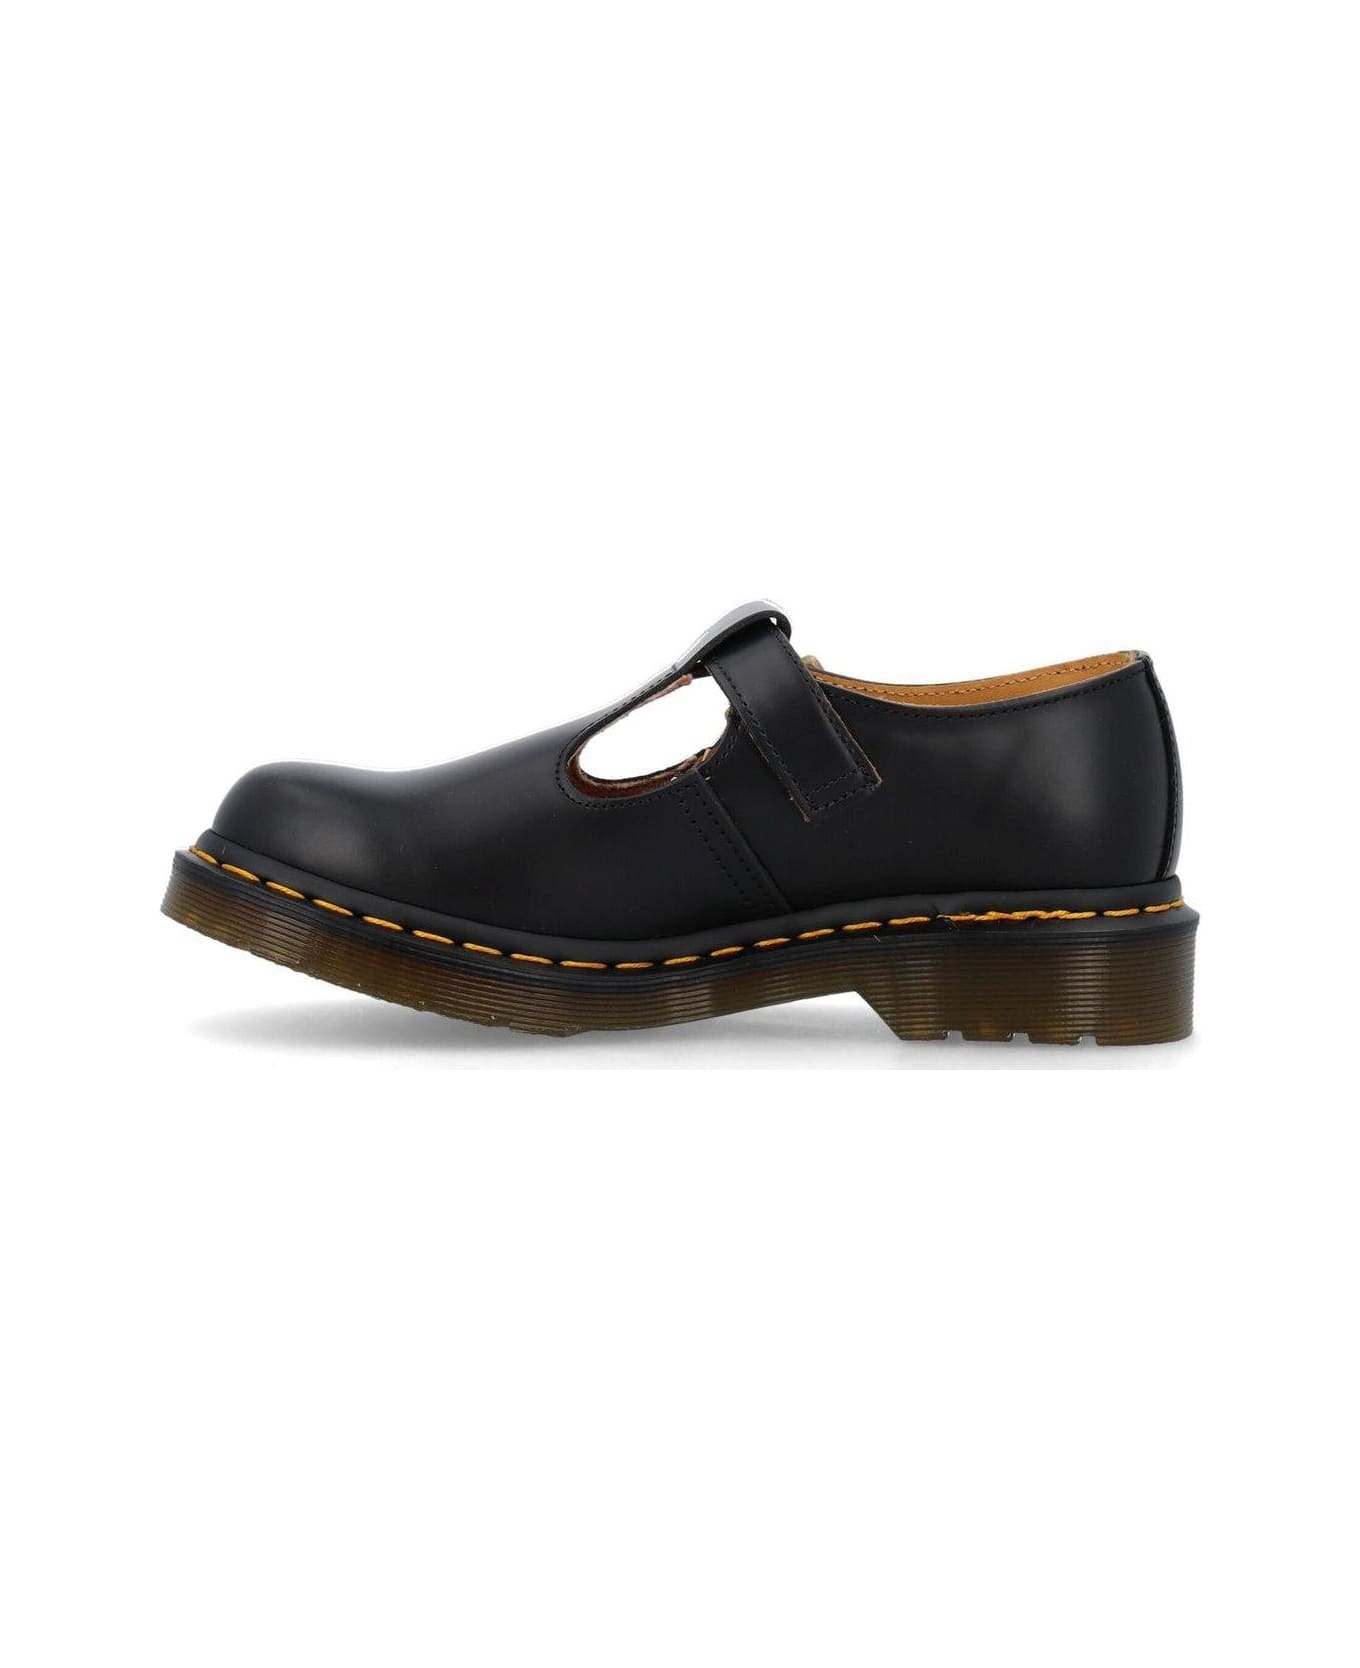 Dr. Martens Polley Mary Jane Flat Shoes - BLACK